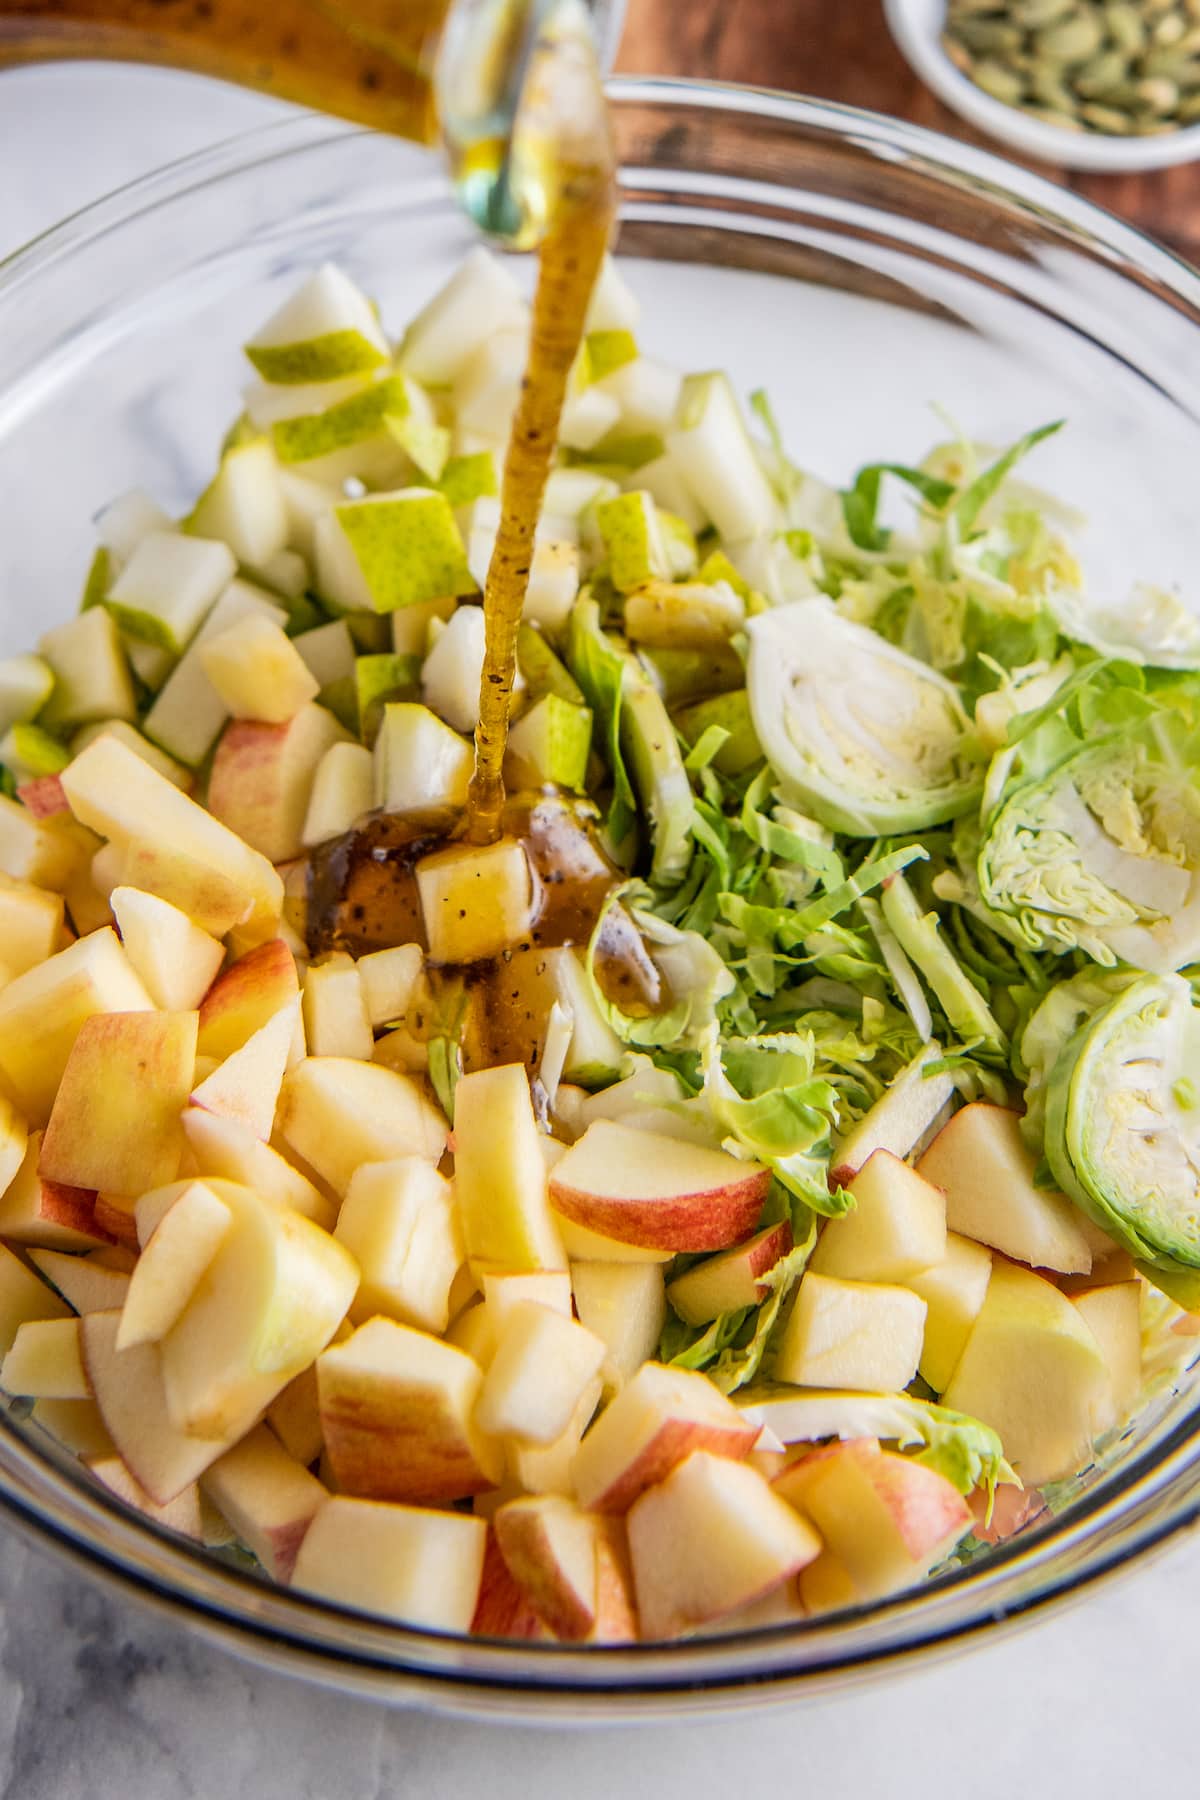 A glass bowl filled with apples and shaved Brussel sprouts with salad dressing being poured on top.